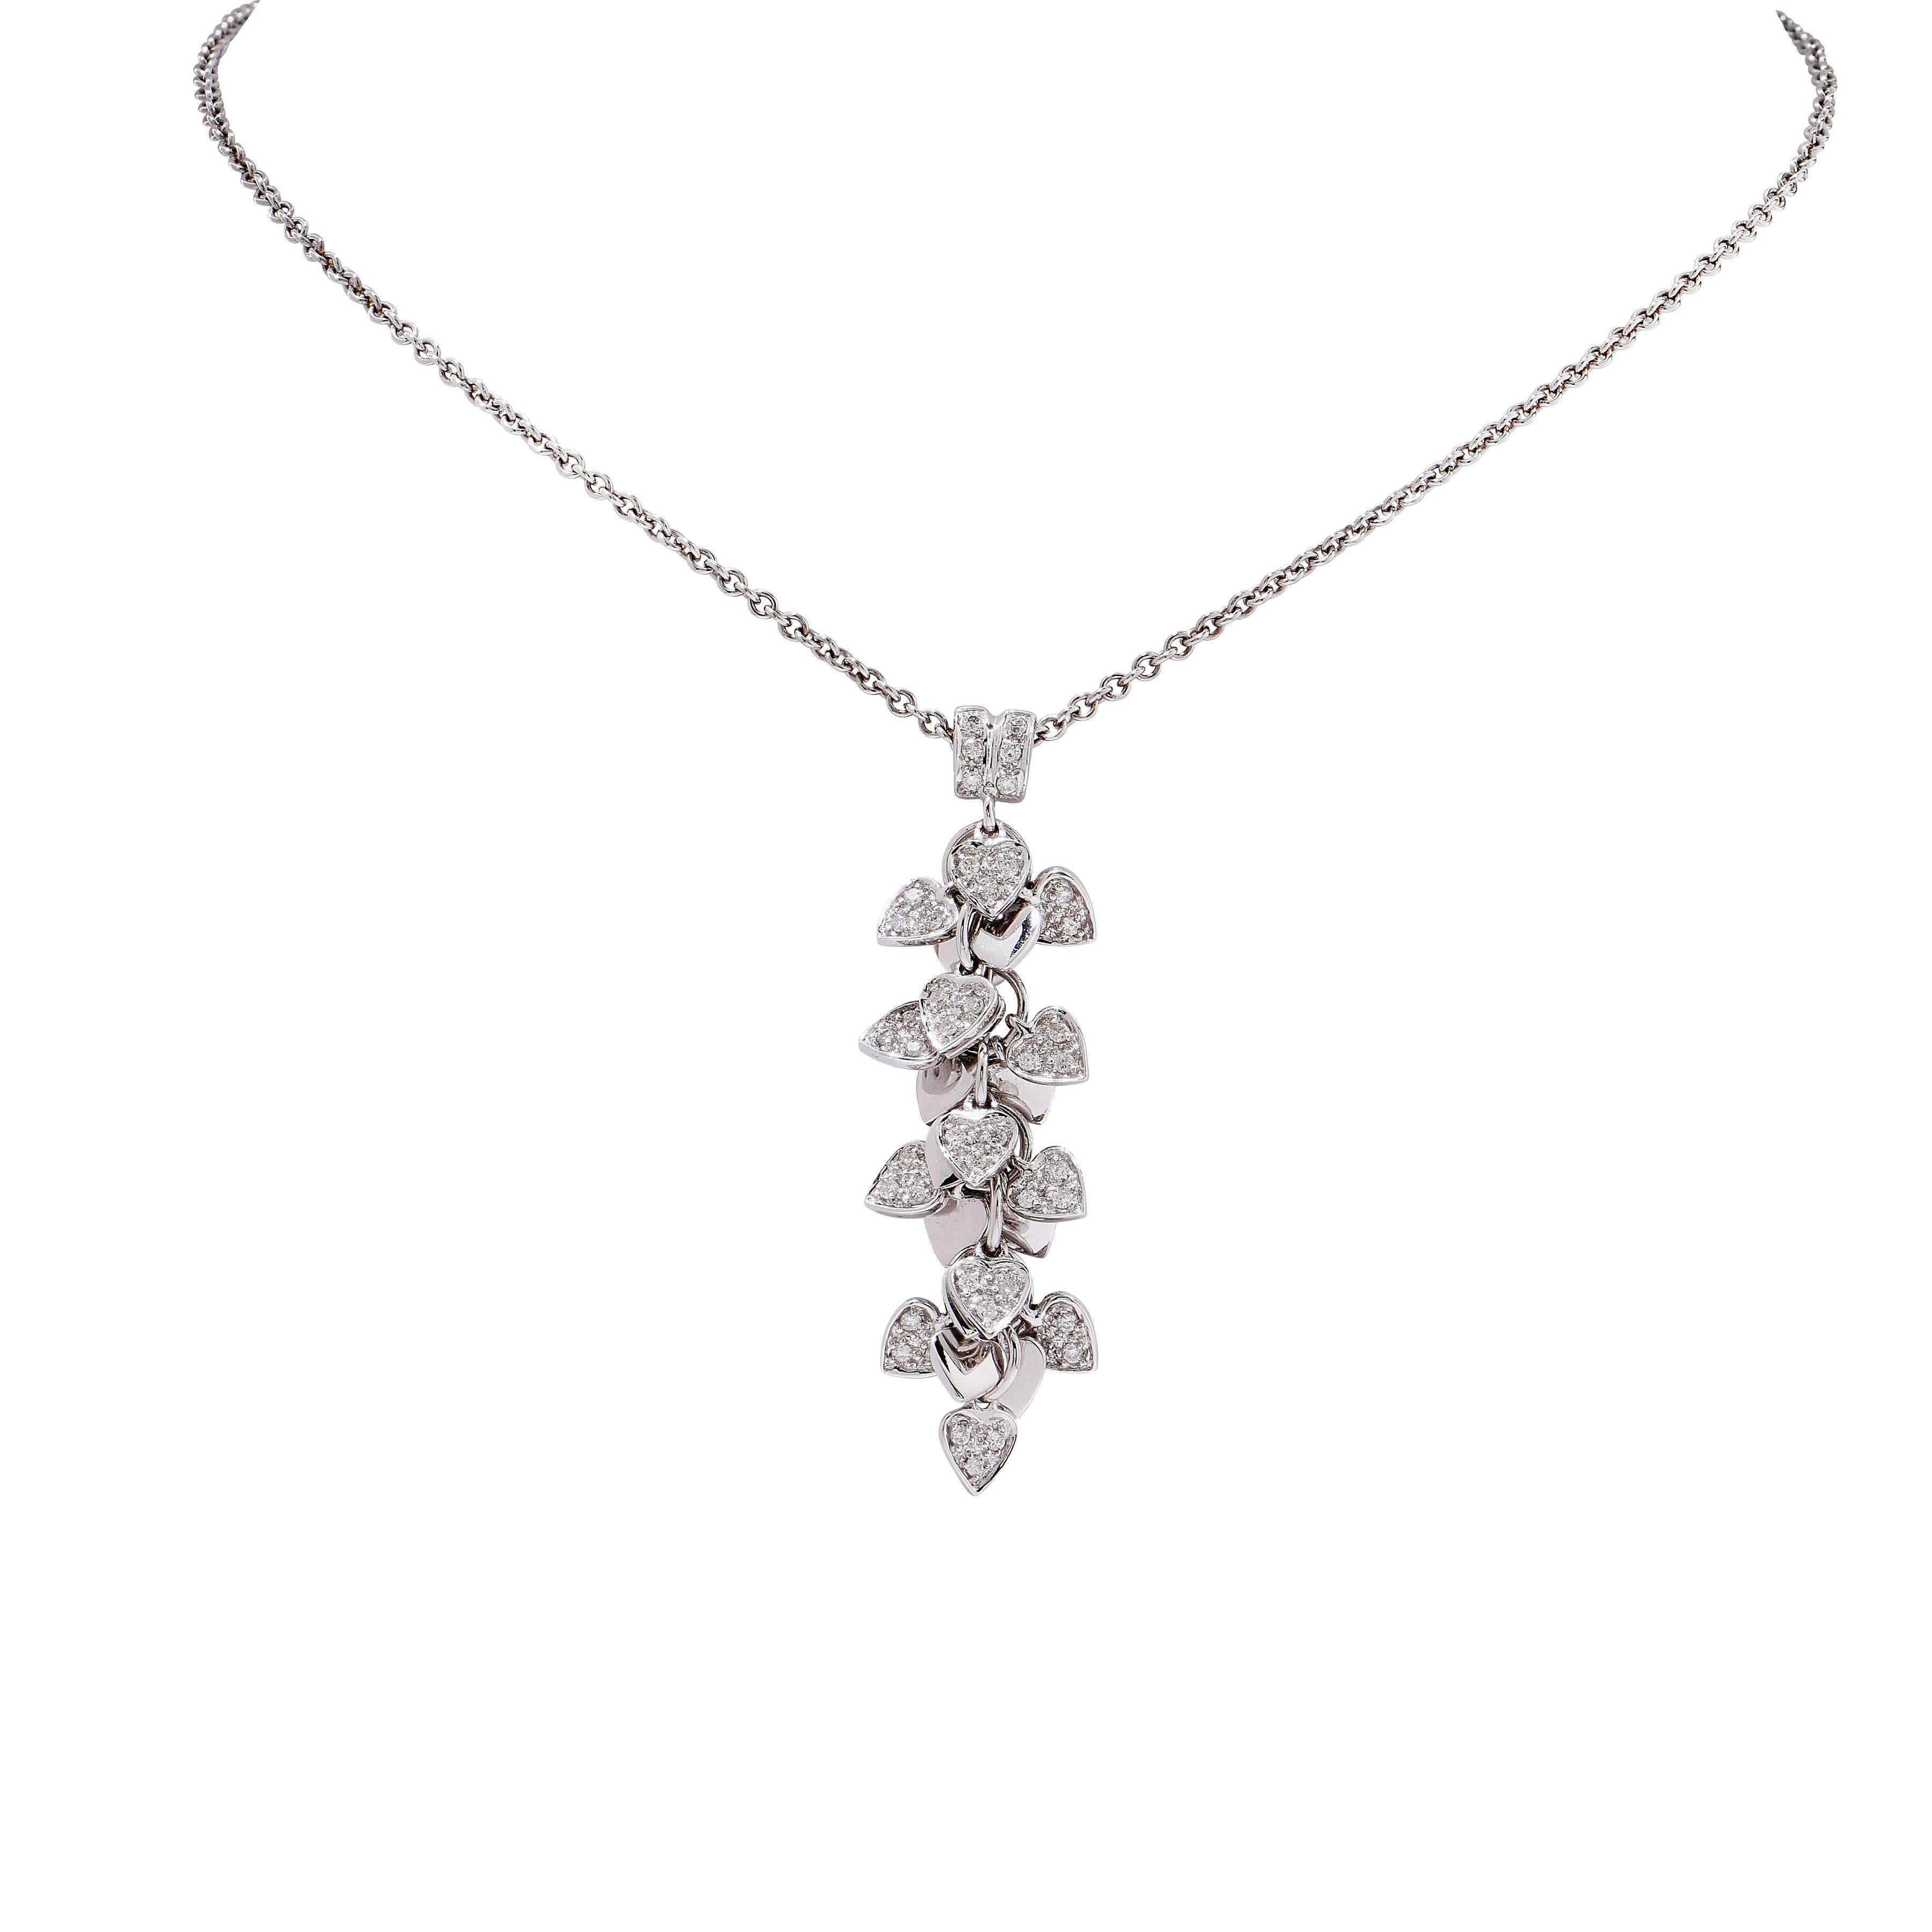 Diamond Hearts 18 Karat White Gold Necklace featuring 45 round cut diamonds with an estimated total weight of .40 carats.

Metal Type: 18 Krat White Gold (tested and/or stamped)
Metal Weight: 6.5 Grams